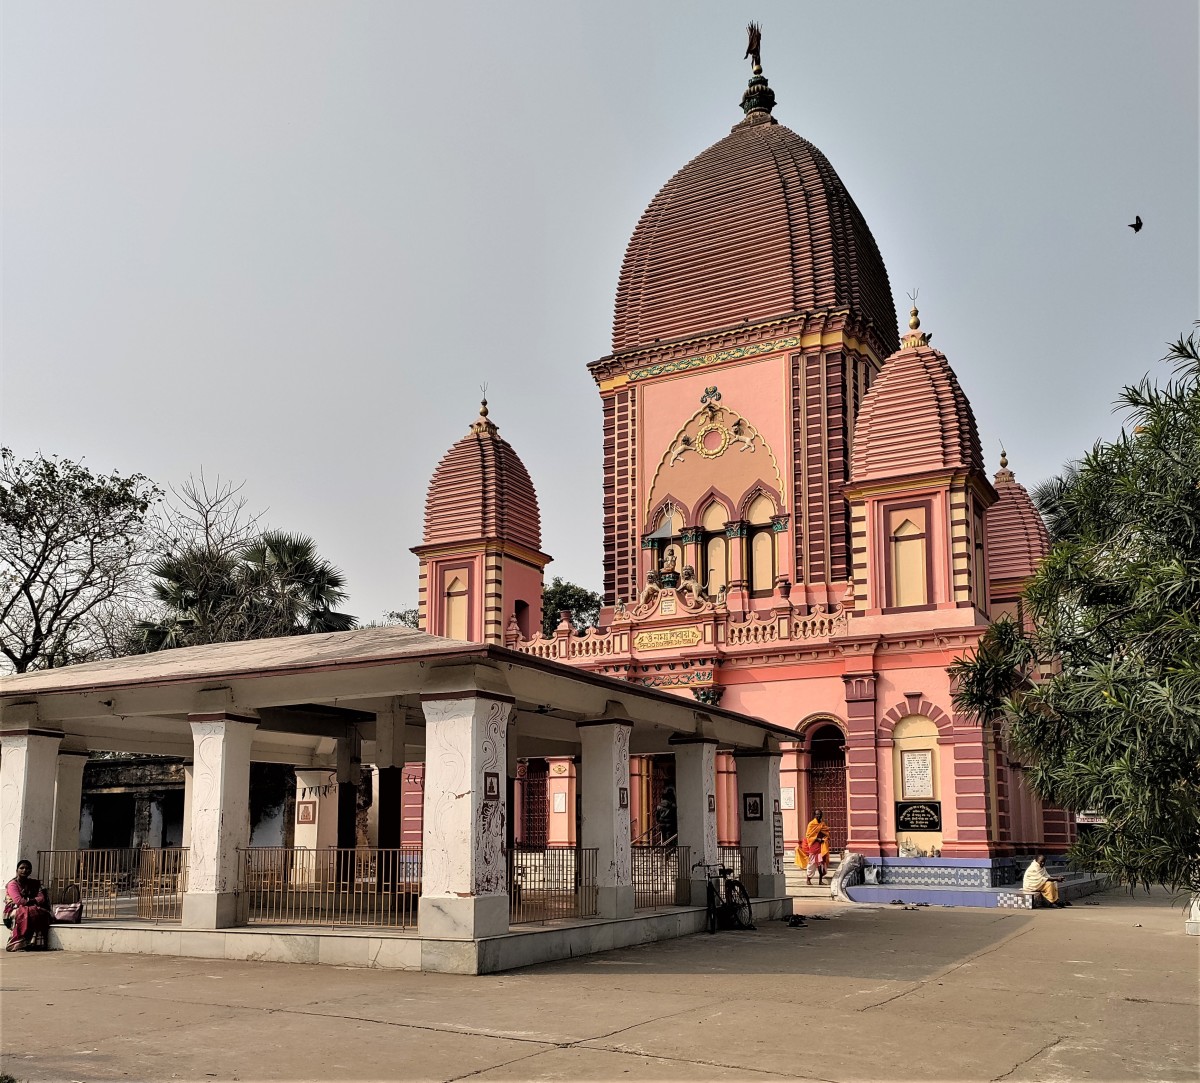 Kaleshwar temple with 5 towers (Ratna-s) and the Mandapa in front